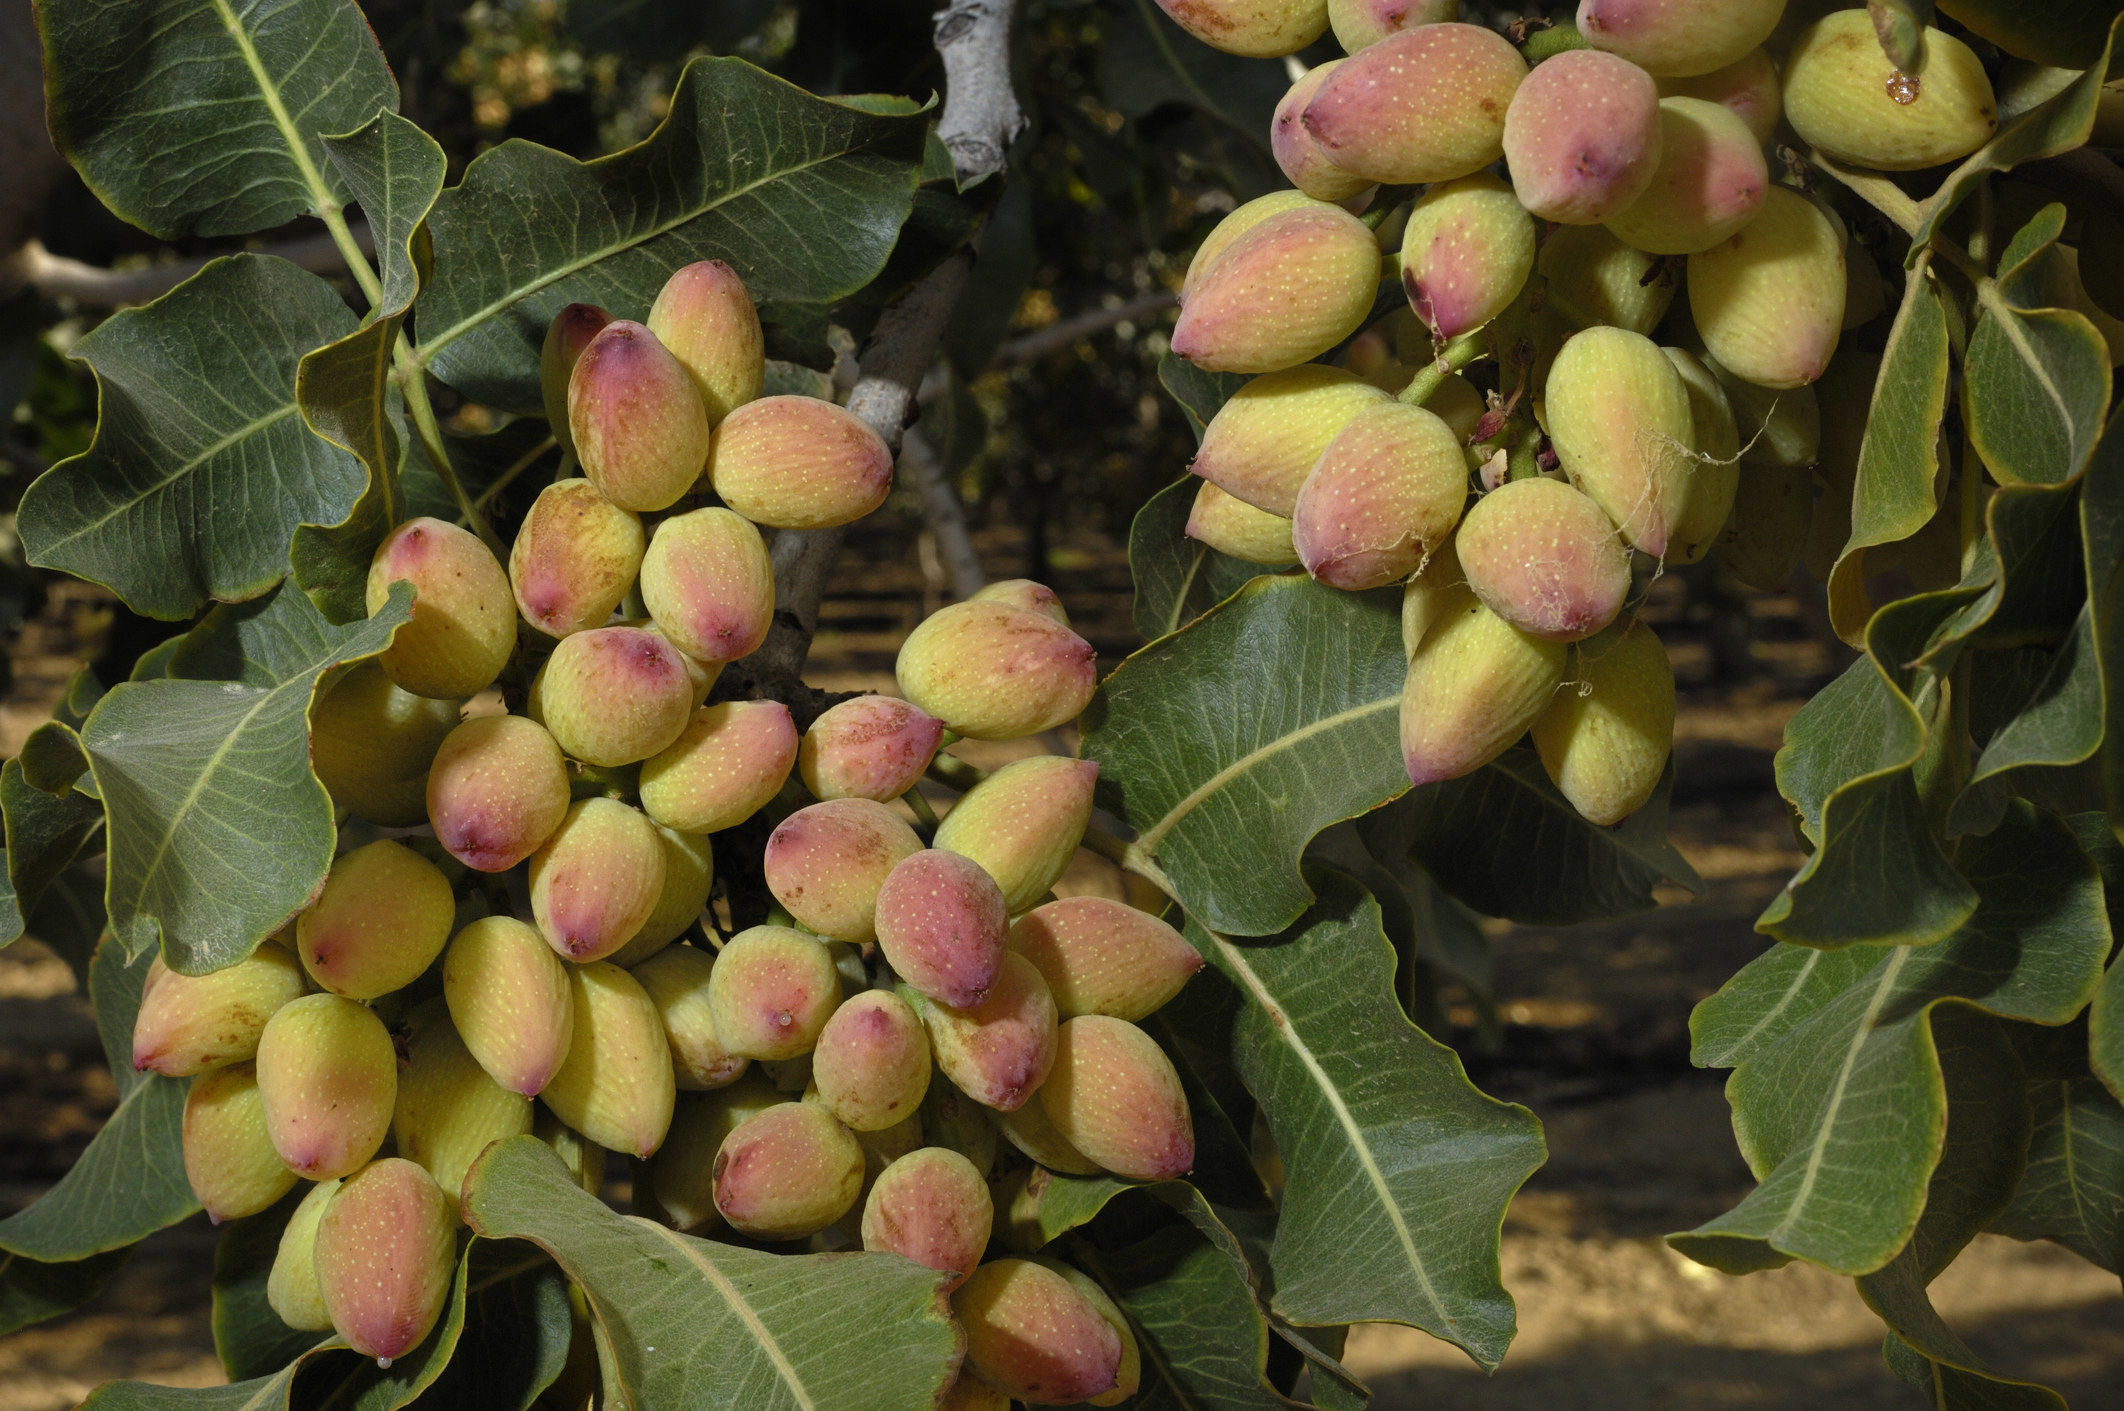 Bunches of what look like small reddish-yellow buds hanging on a bush